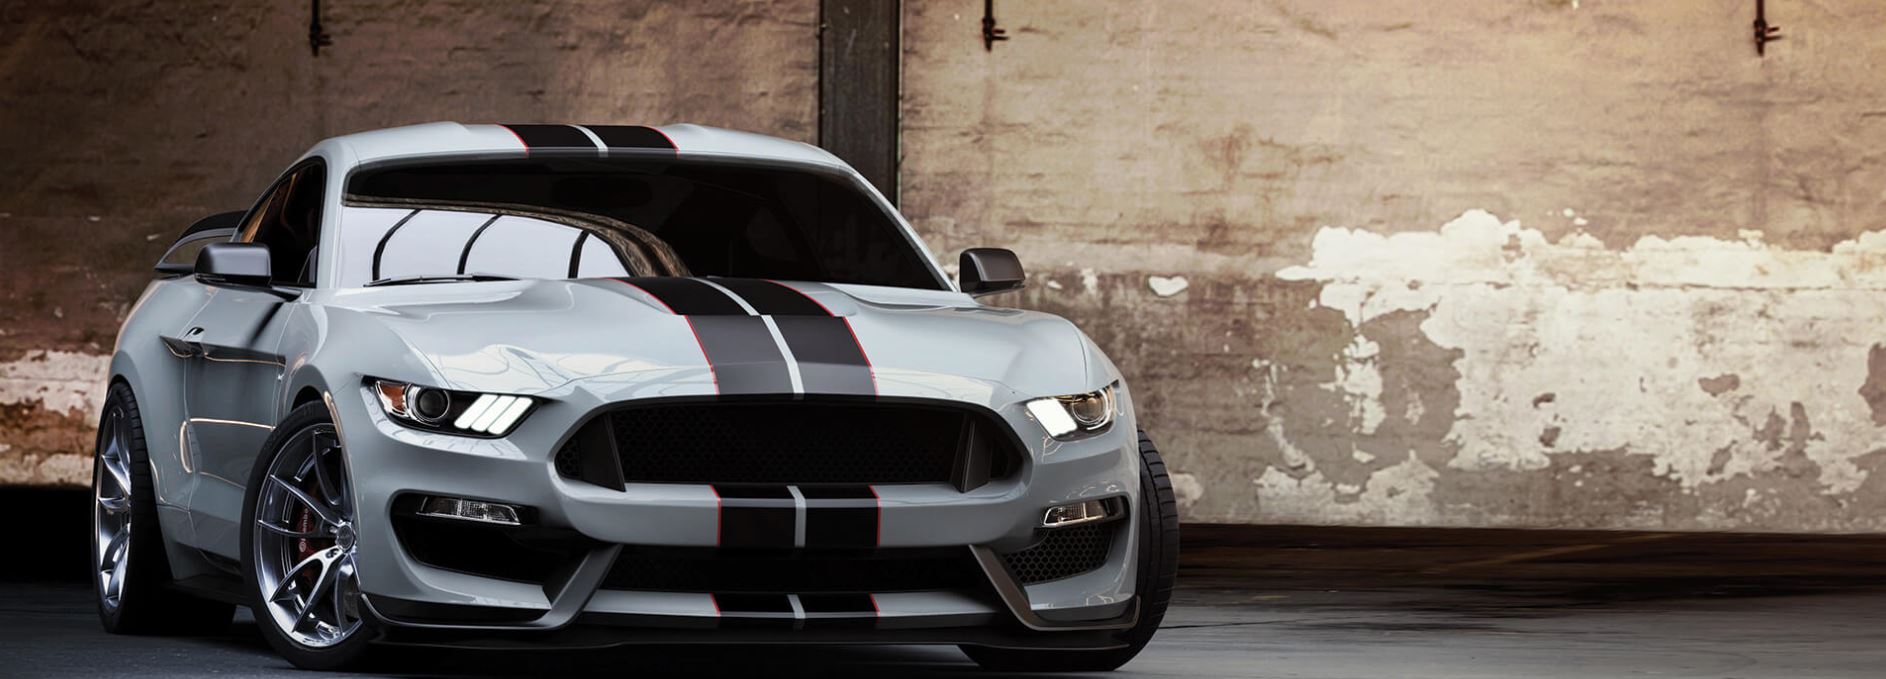 Drake Automotive entered an exclusive deal with Carroll Shelby Licensing in 2017 to re-launch the Carroll Shelby Wheel brand nam